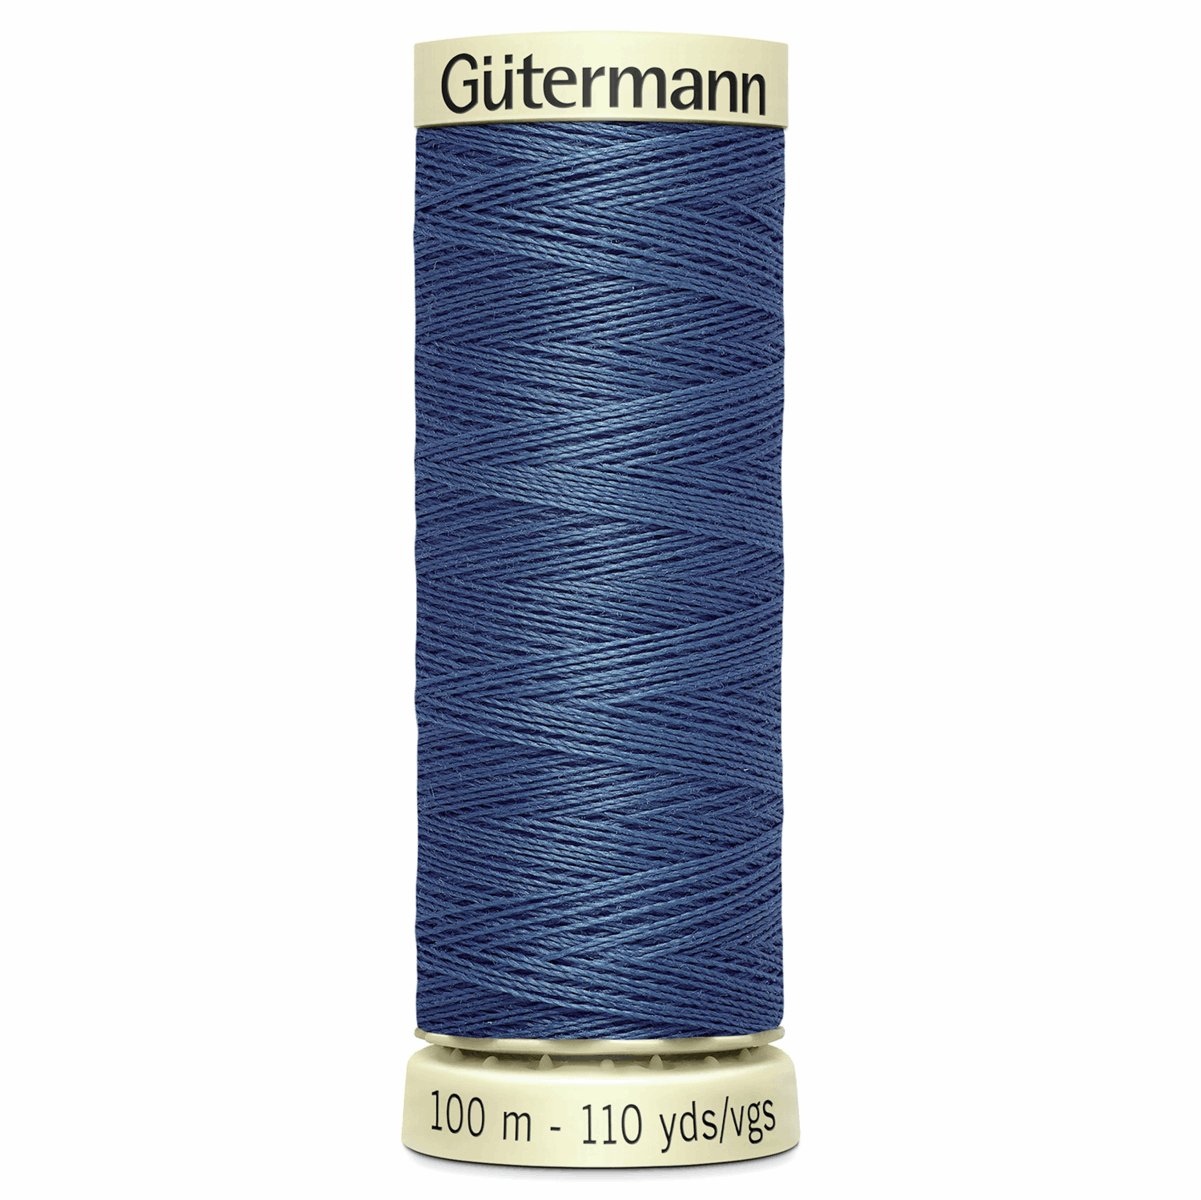 Gutermann Sew-All Sewing Thread | 435 Petrol colour from Jaycotts Sewing Supplies